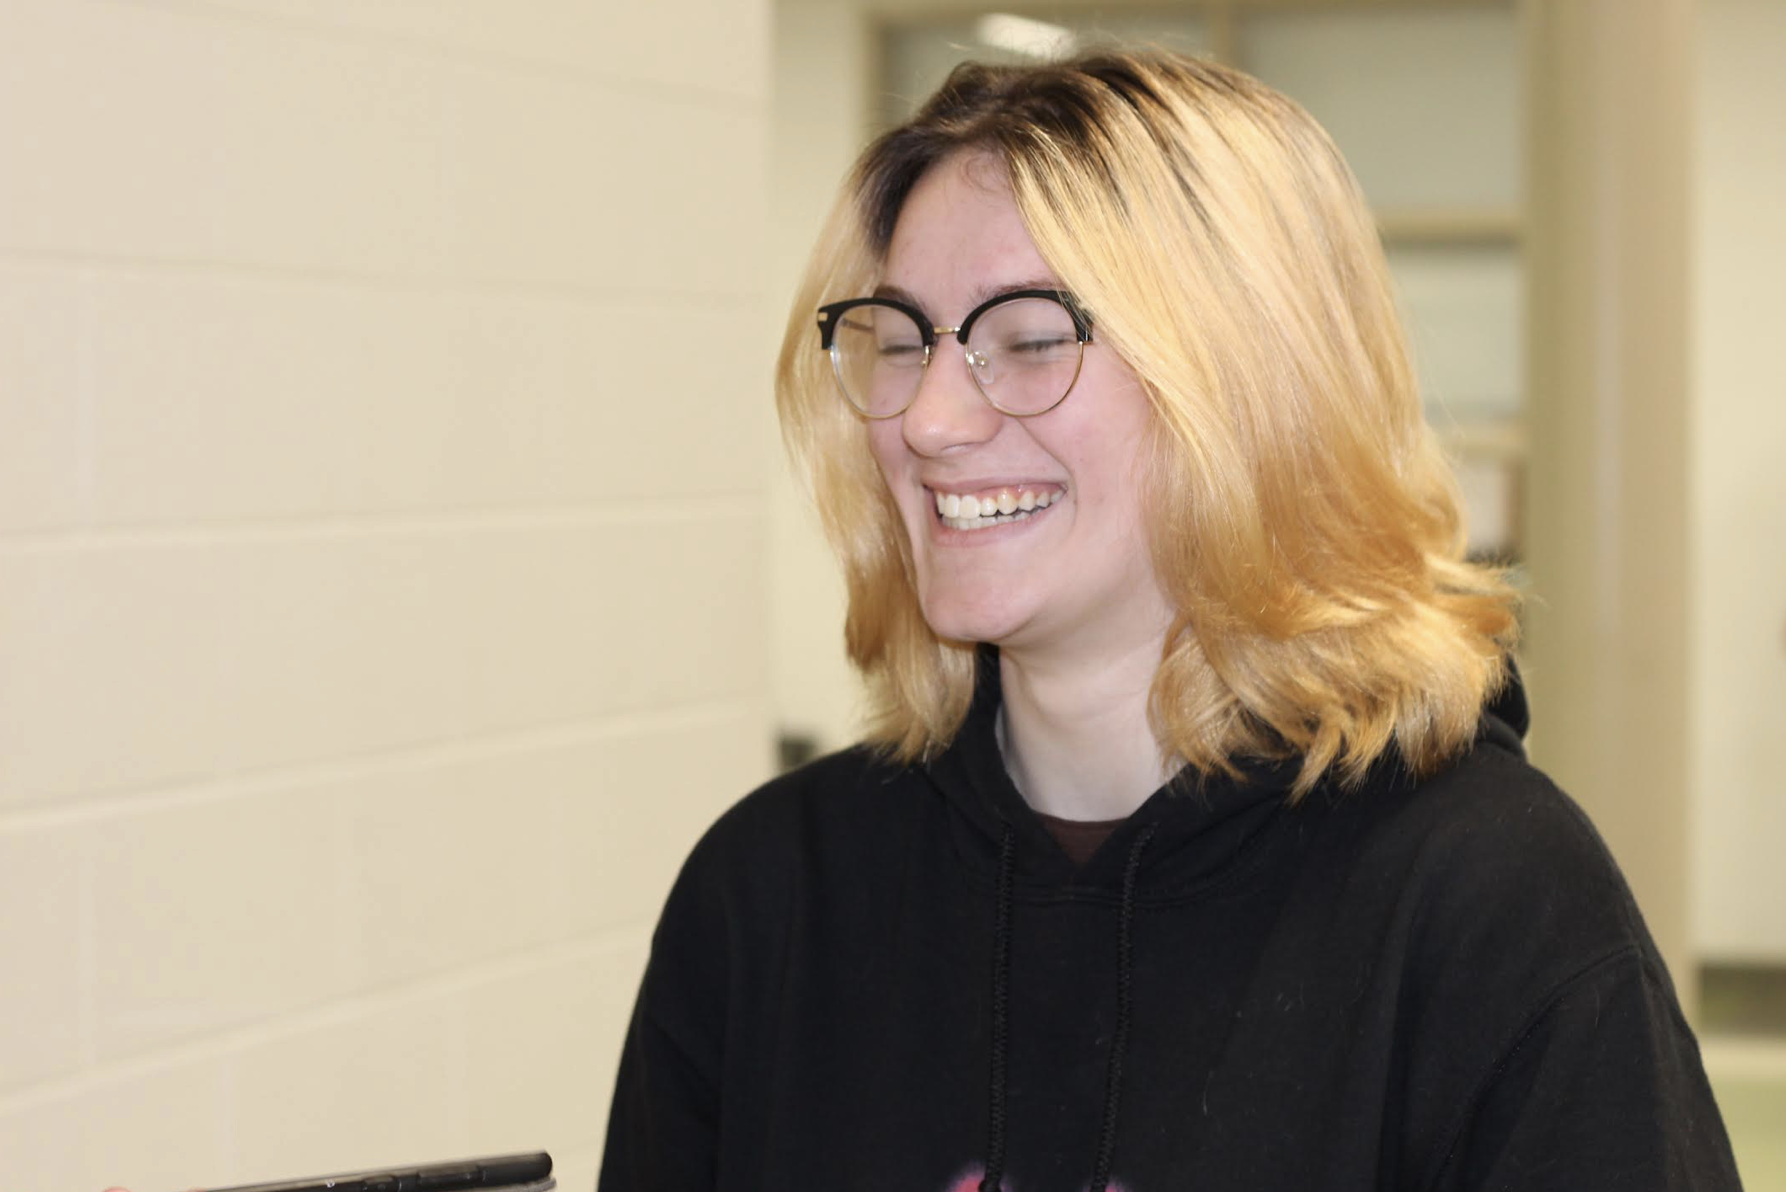 Photo of sophomore Lisa Schweyer as she smiles and laughs in the hall.